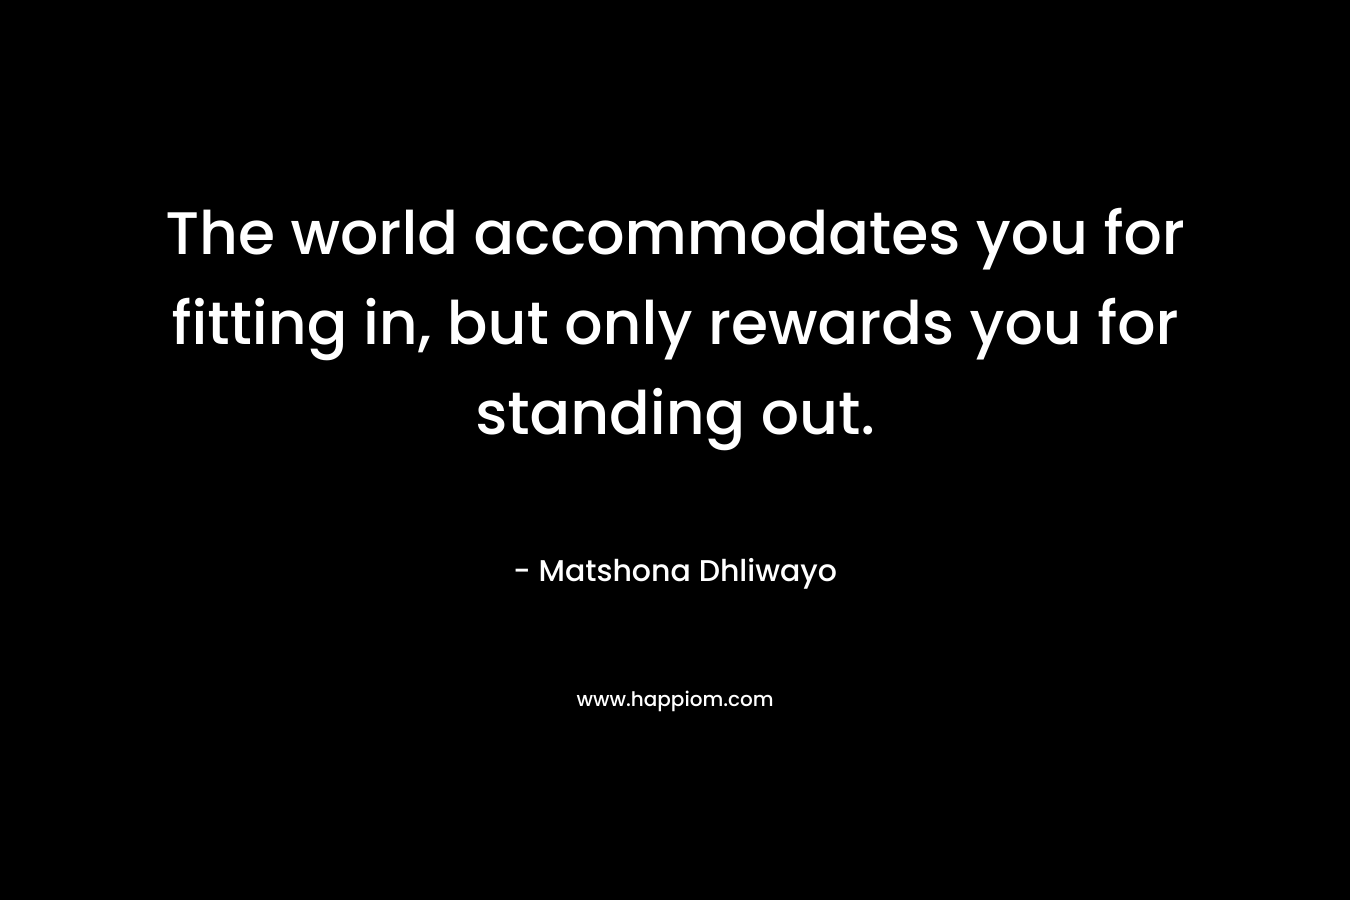 The world accommodates you for fitting in, but only rewards you for standing out. – Matshona Dhliwayo